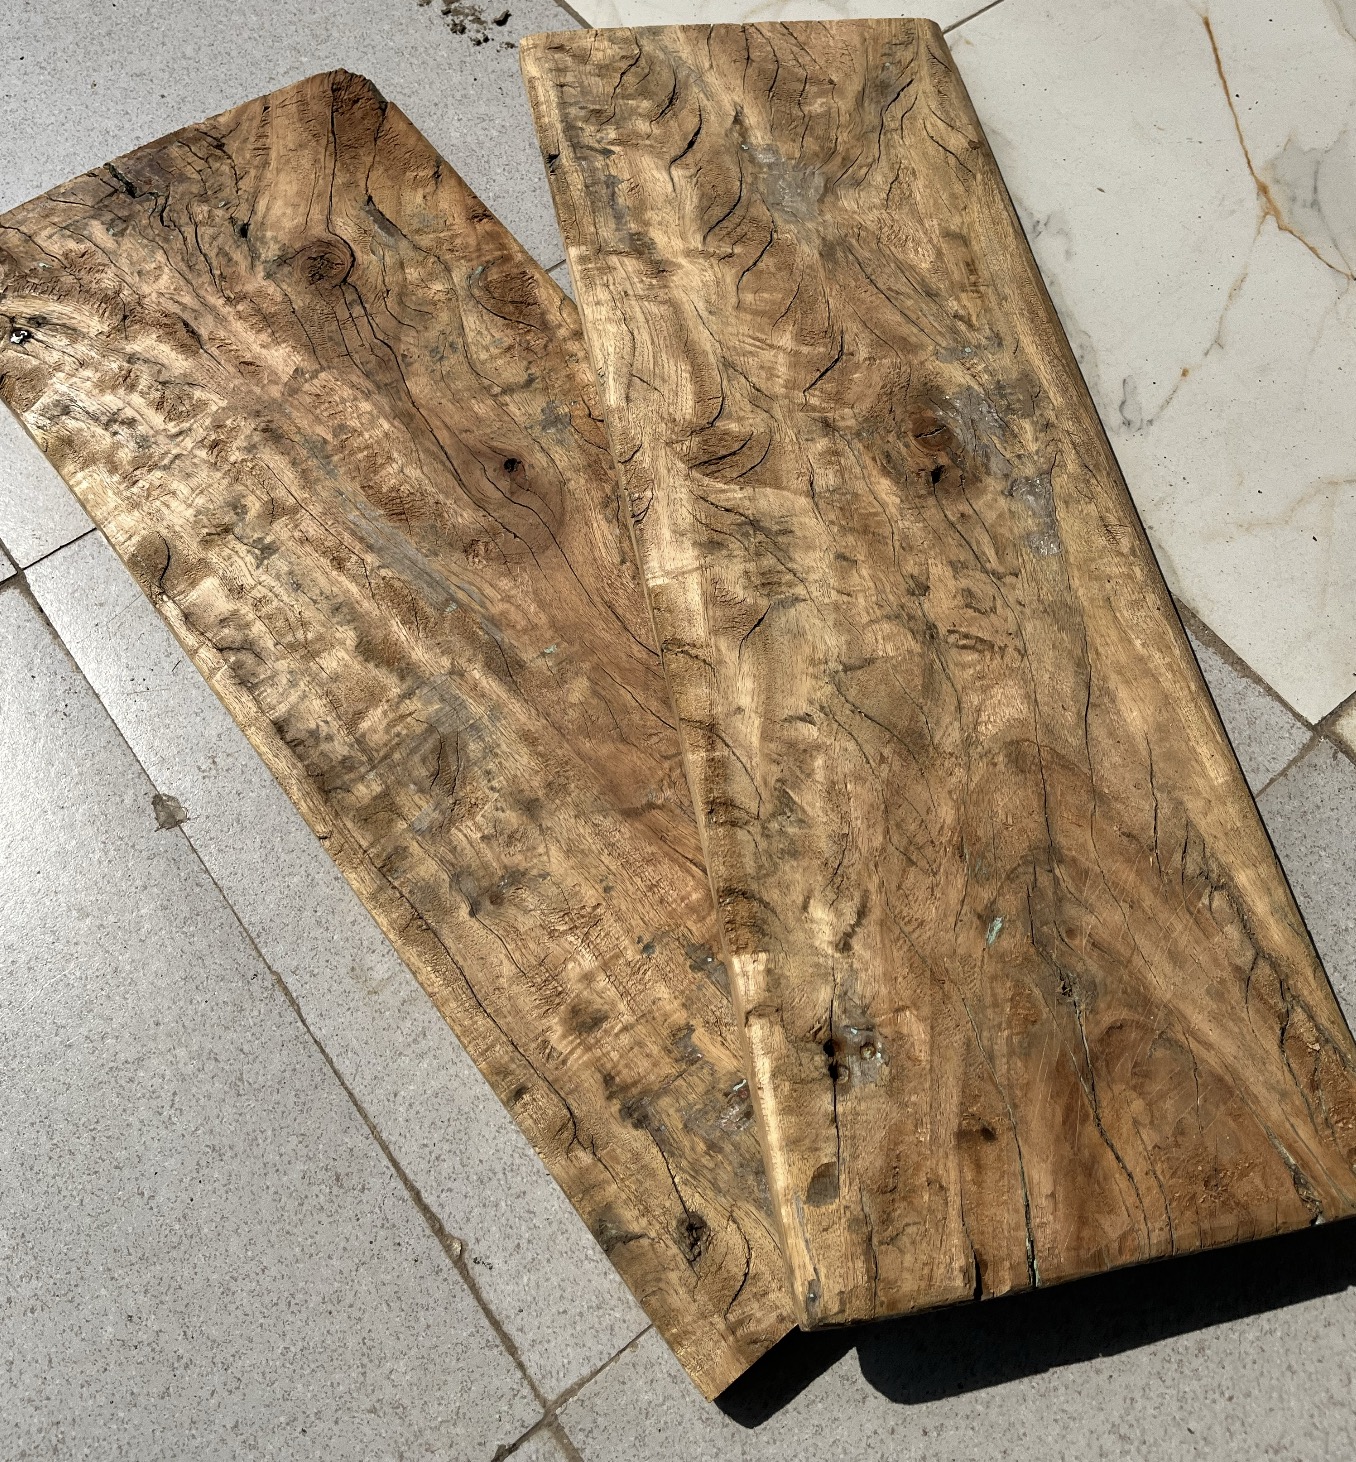 2 pieces of smoothened wooden plank